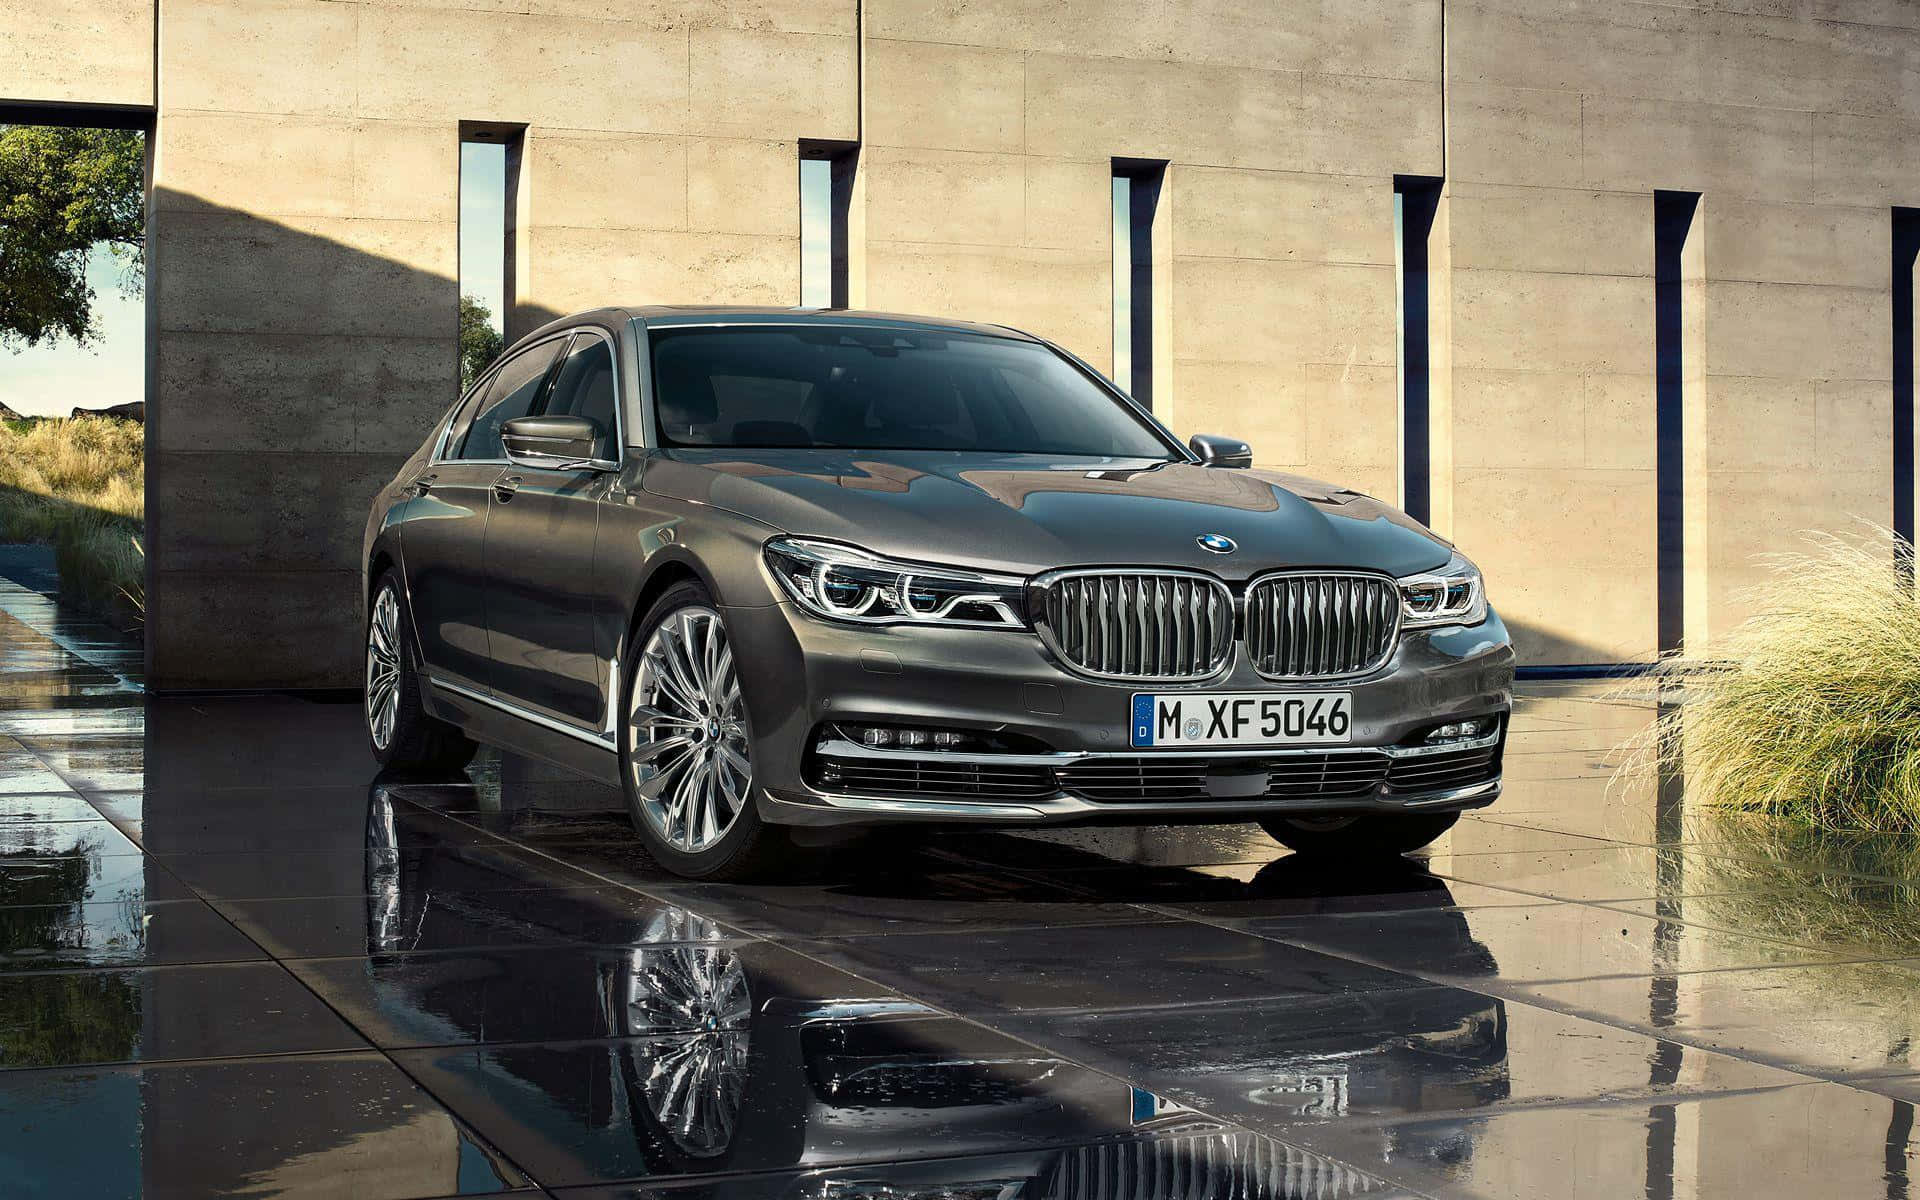 Sleek and luxurious BMW 7 Series in motion Wallpaper